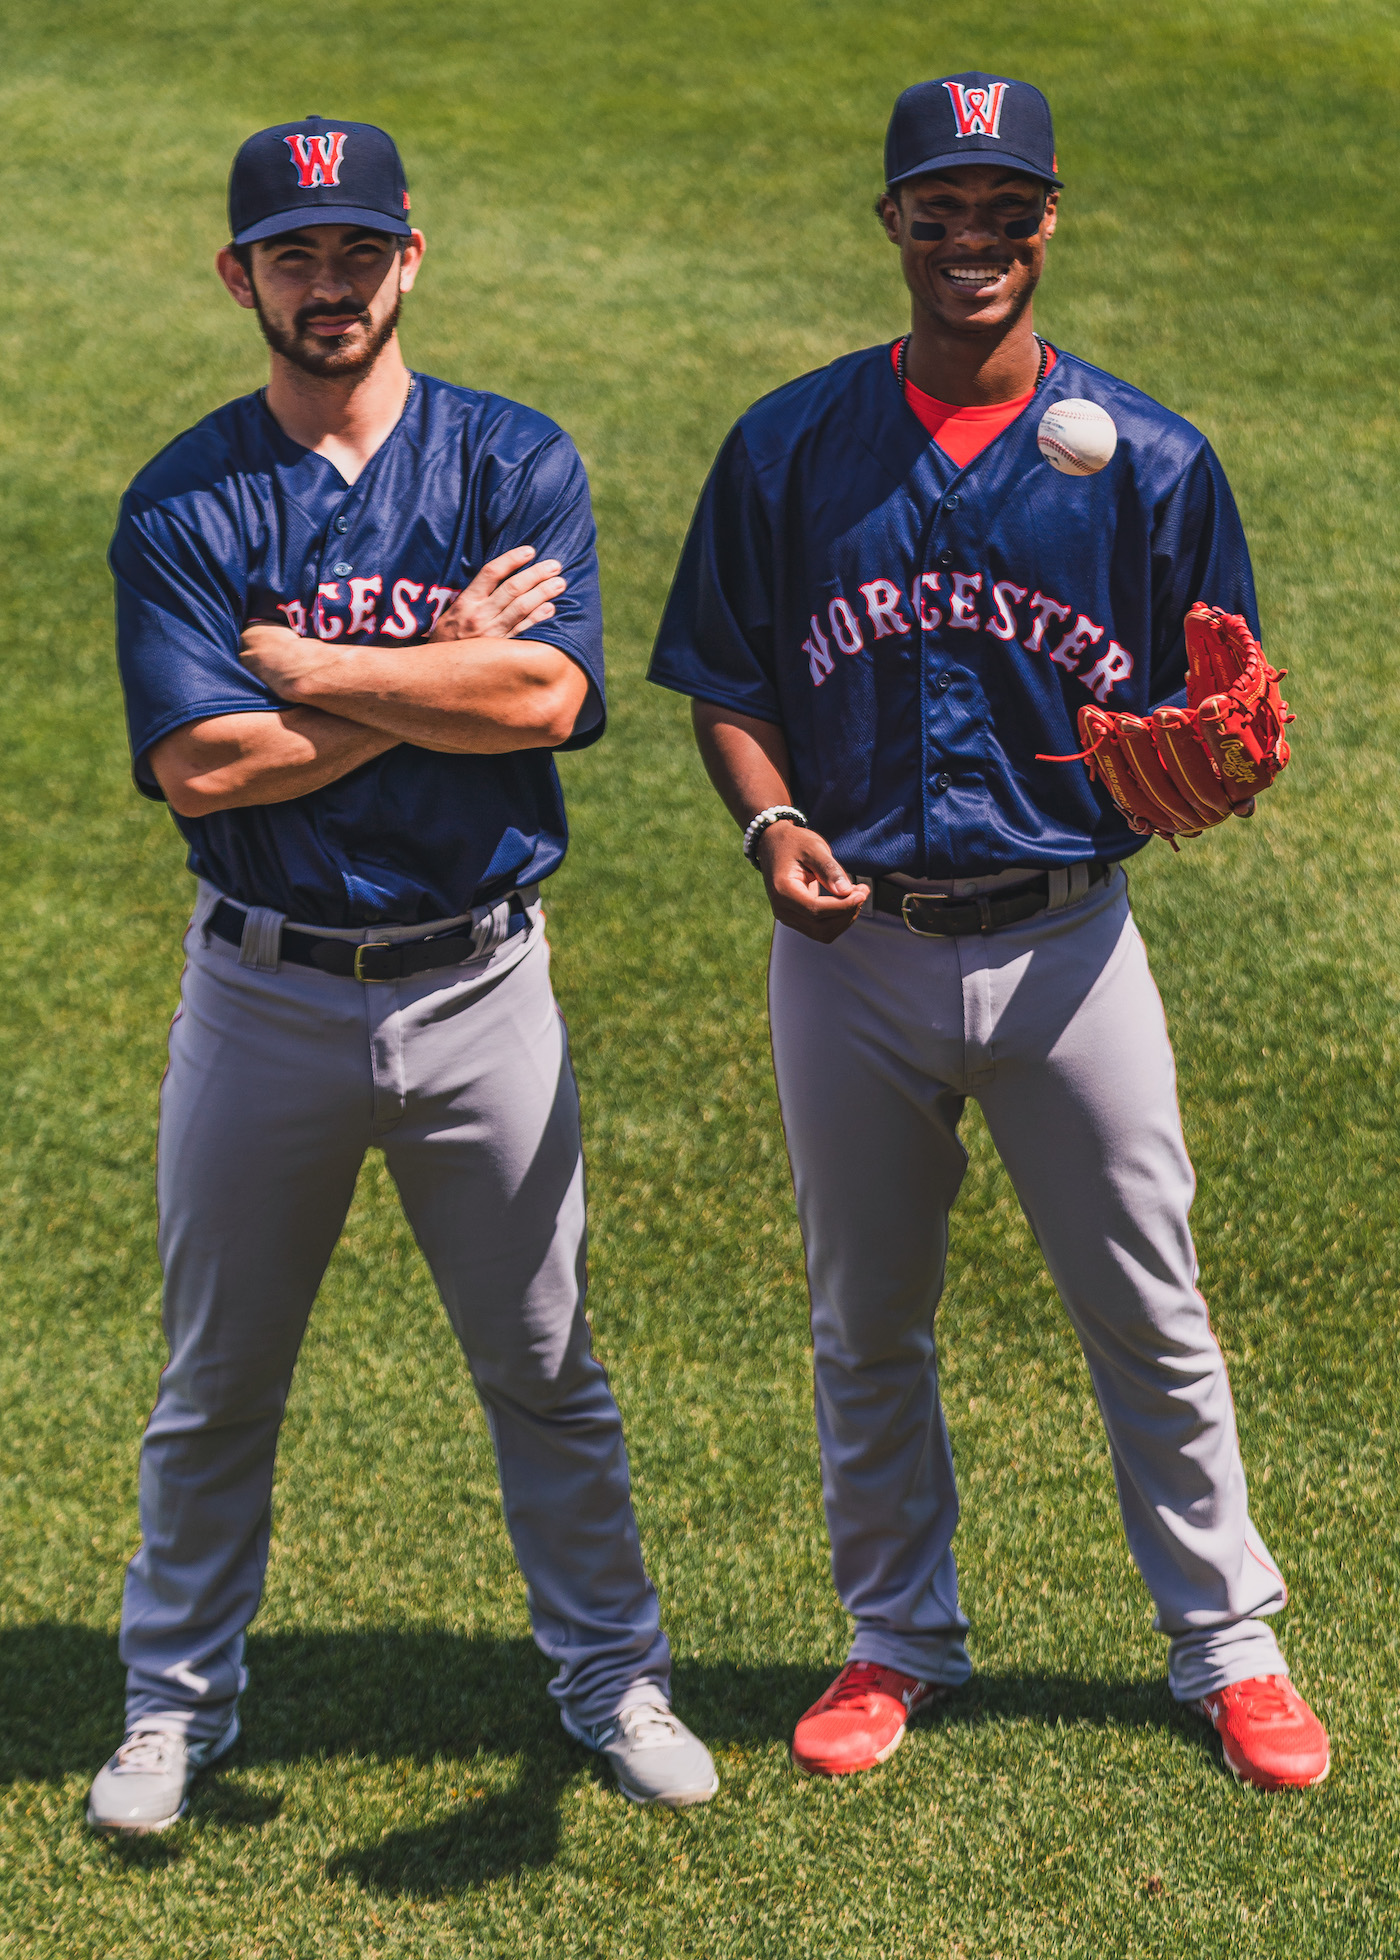 Worcester Red Sox unveil nine jerseys for 2021 season - The Boston